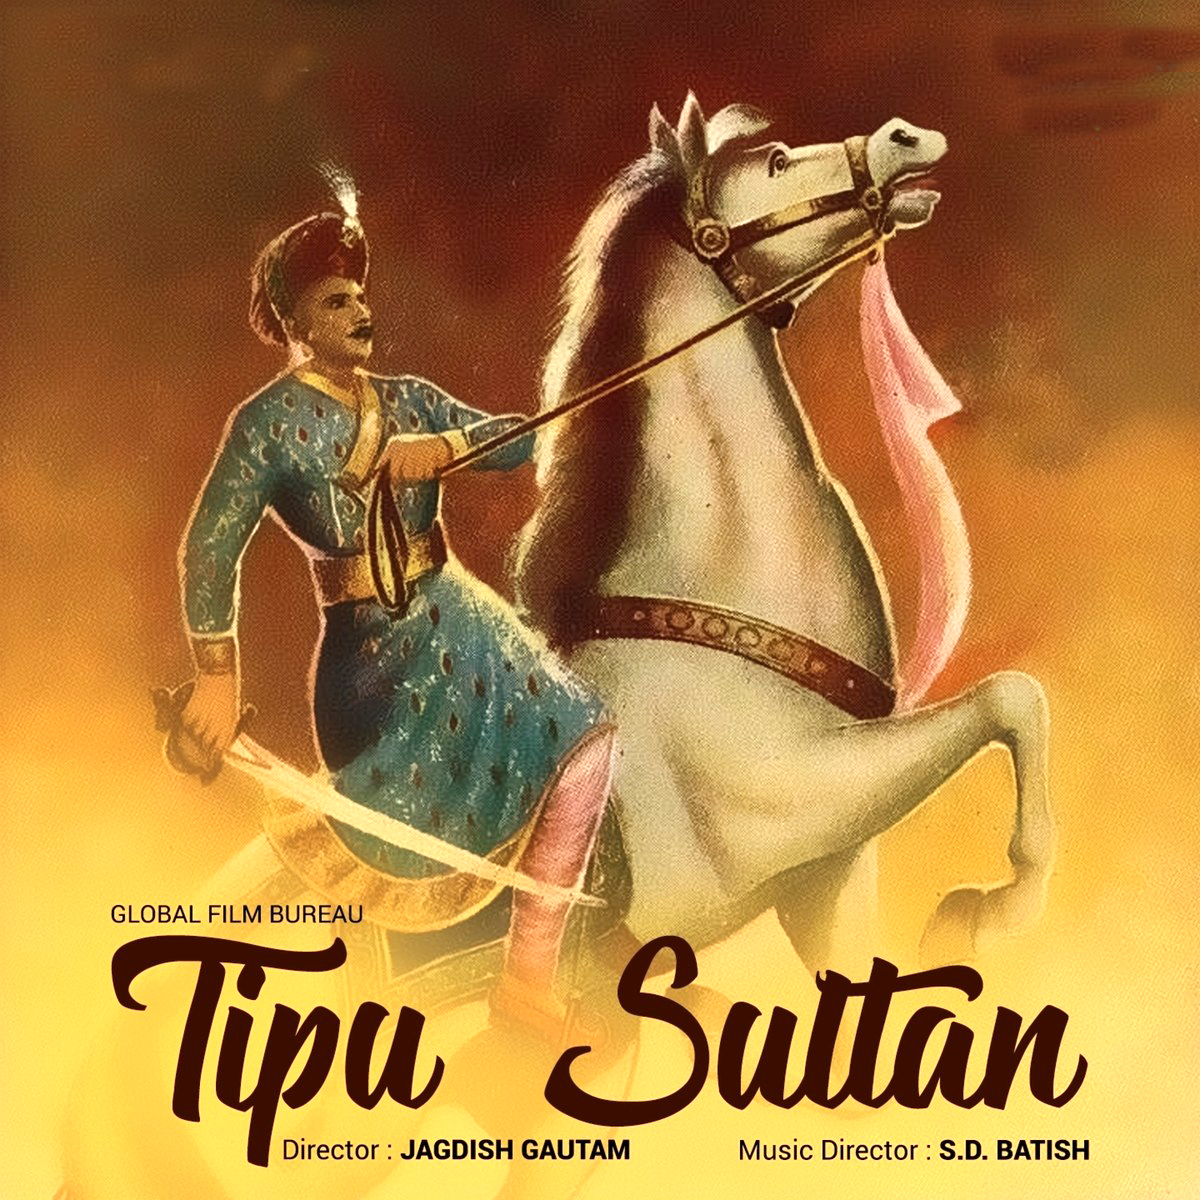 Tipu Sultan Photos, Poster, Images, Photos, Wallpapers, HD Images, Pictures  - Bollywood Hungama